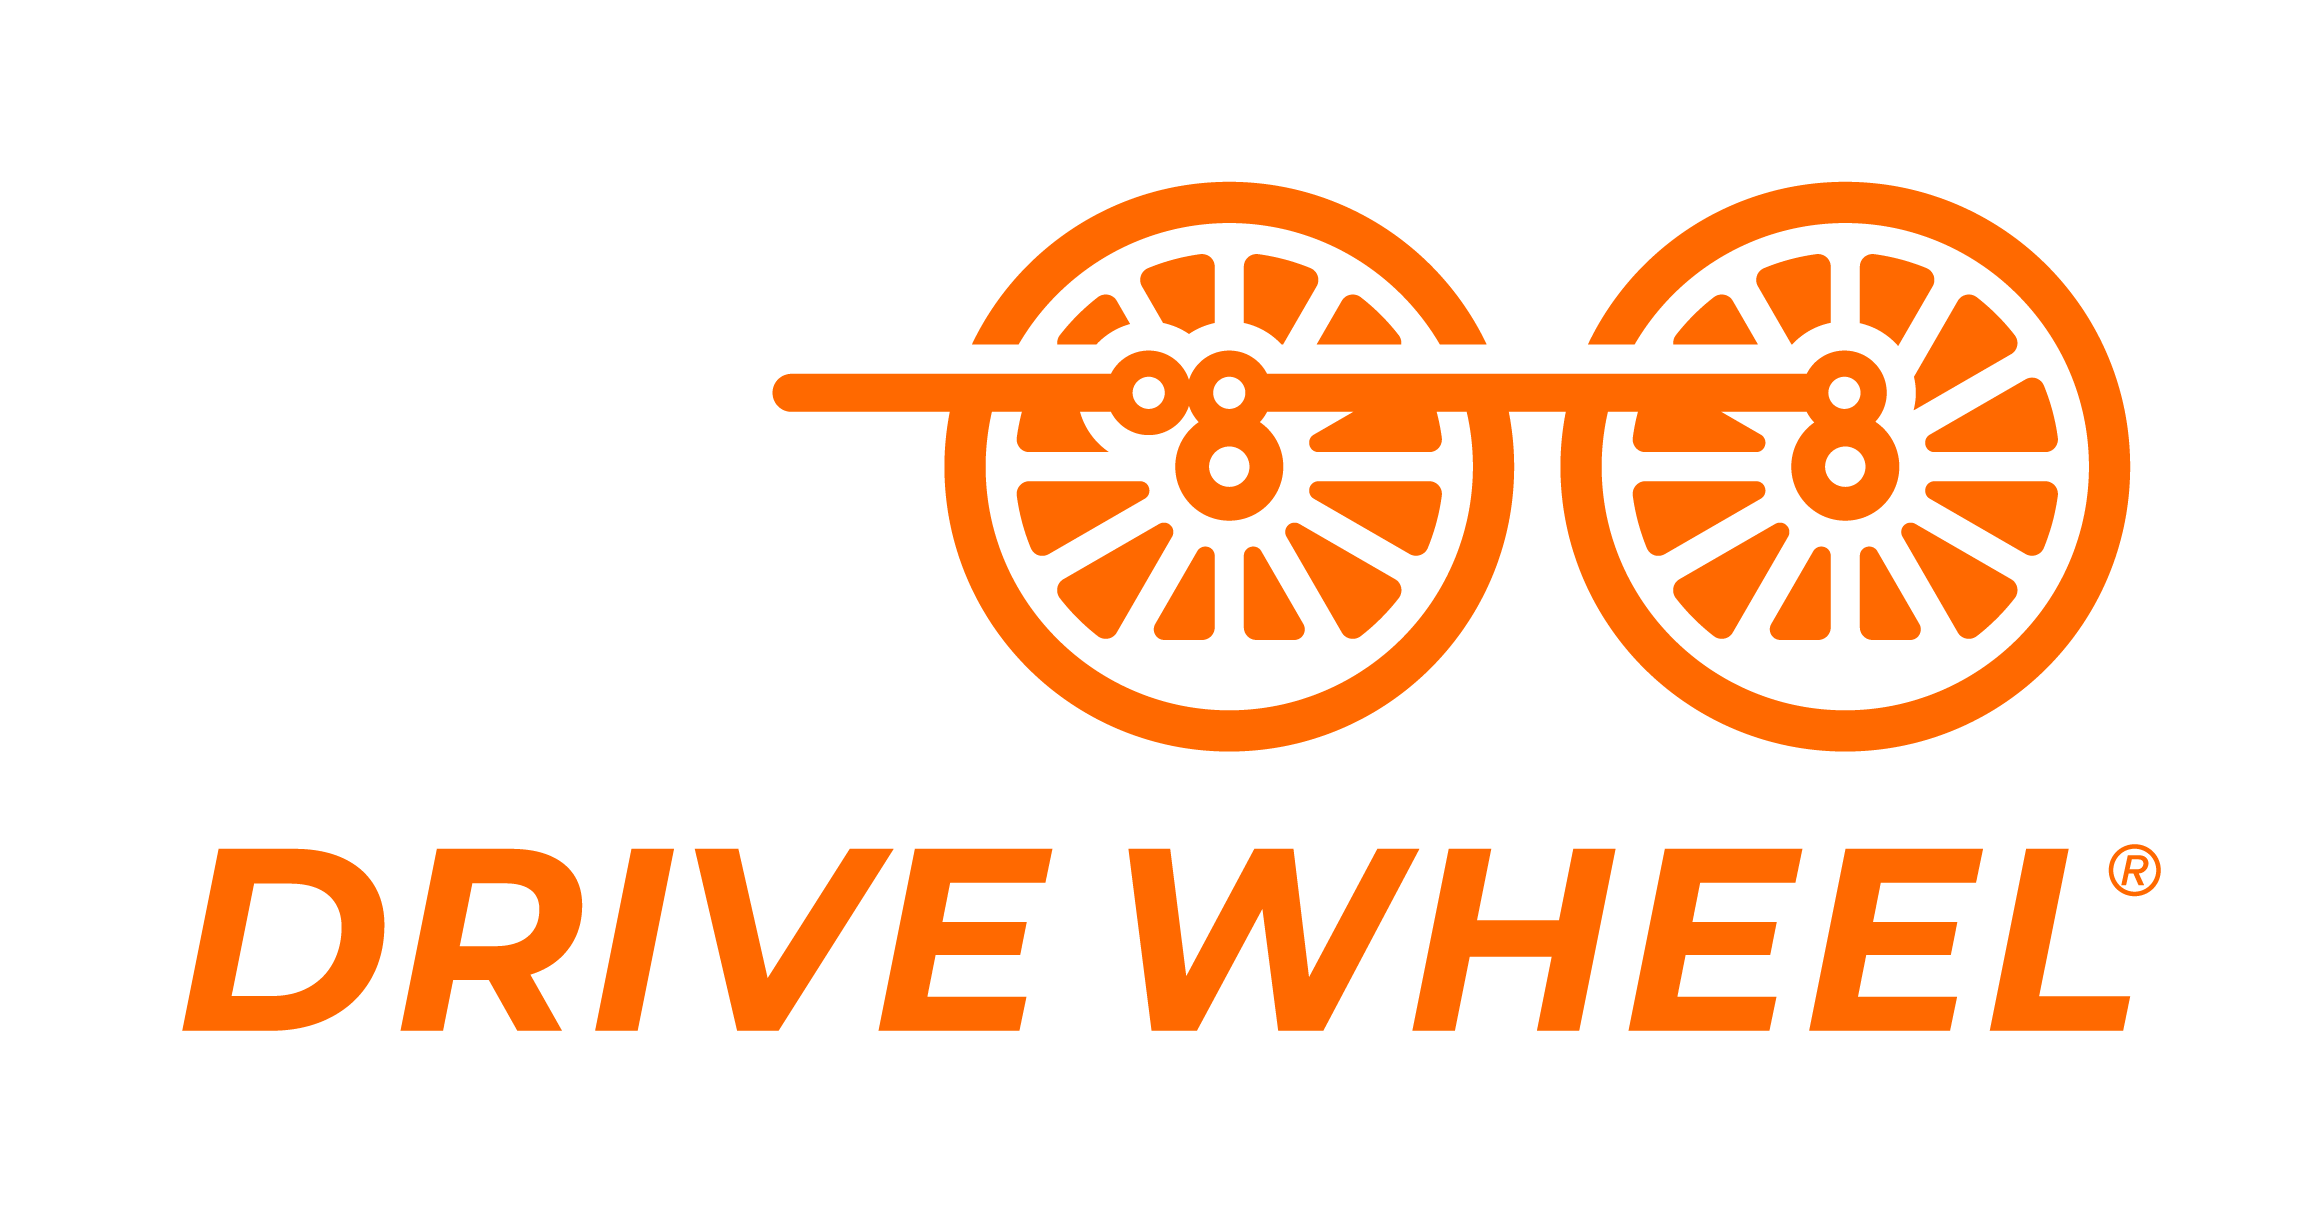 Two sets of orange train wheels connected with a tie bar